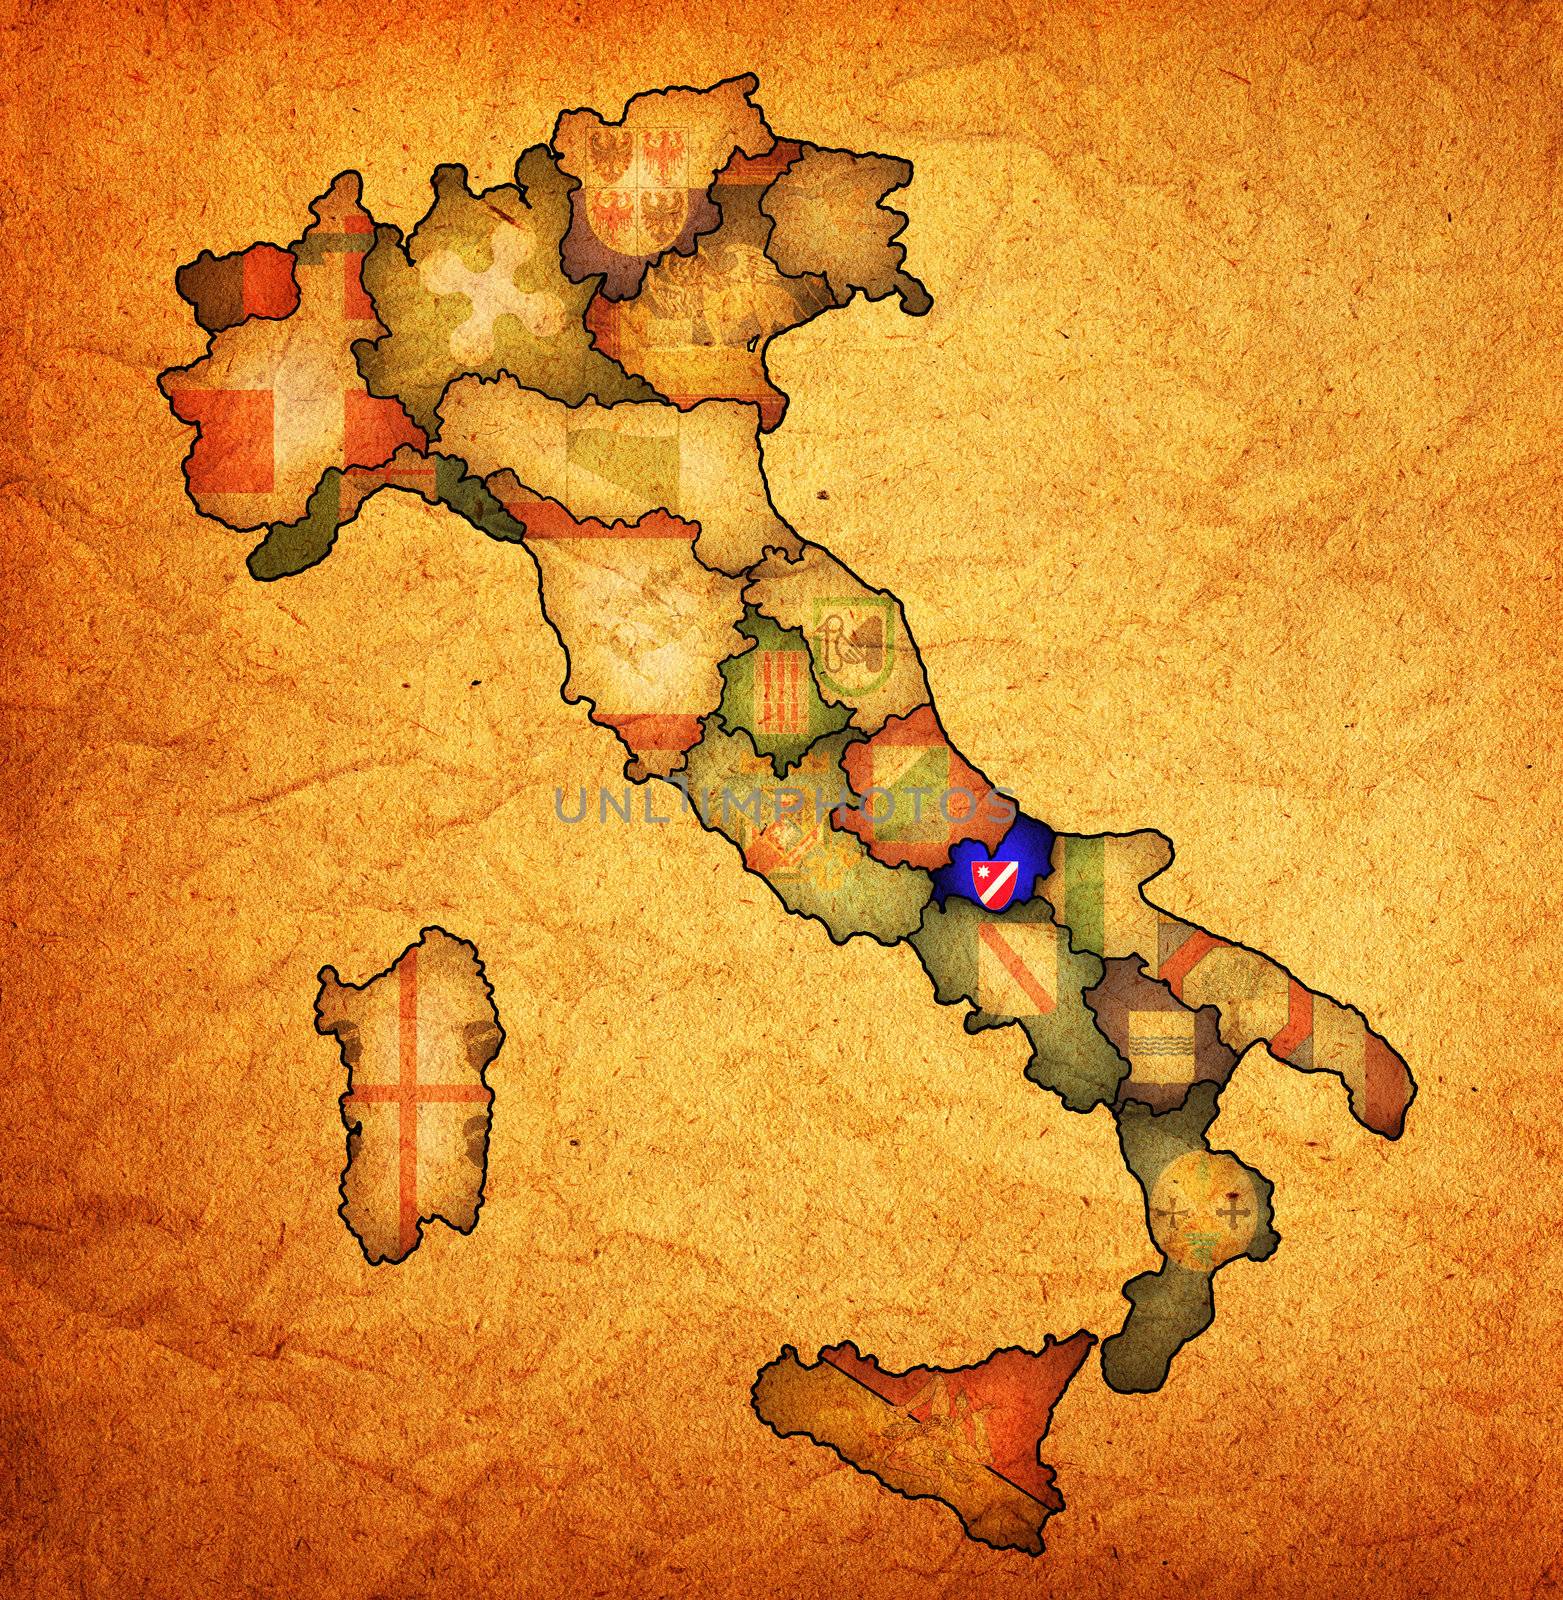 molise region on administration map of italy with flags